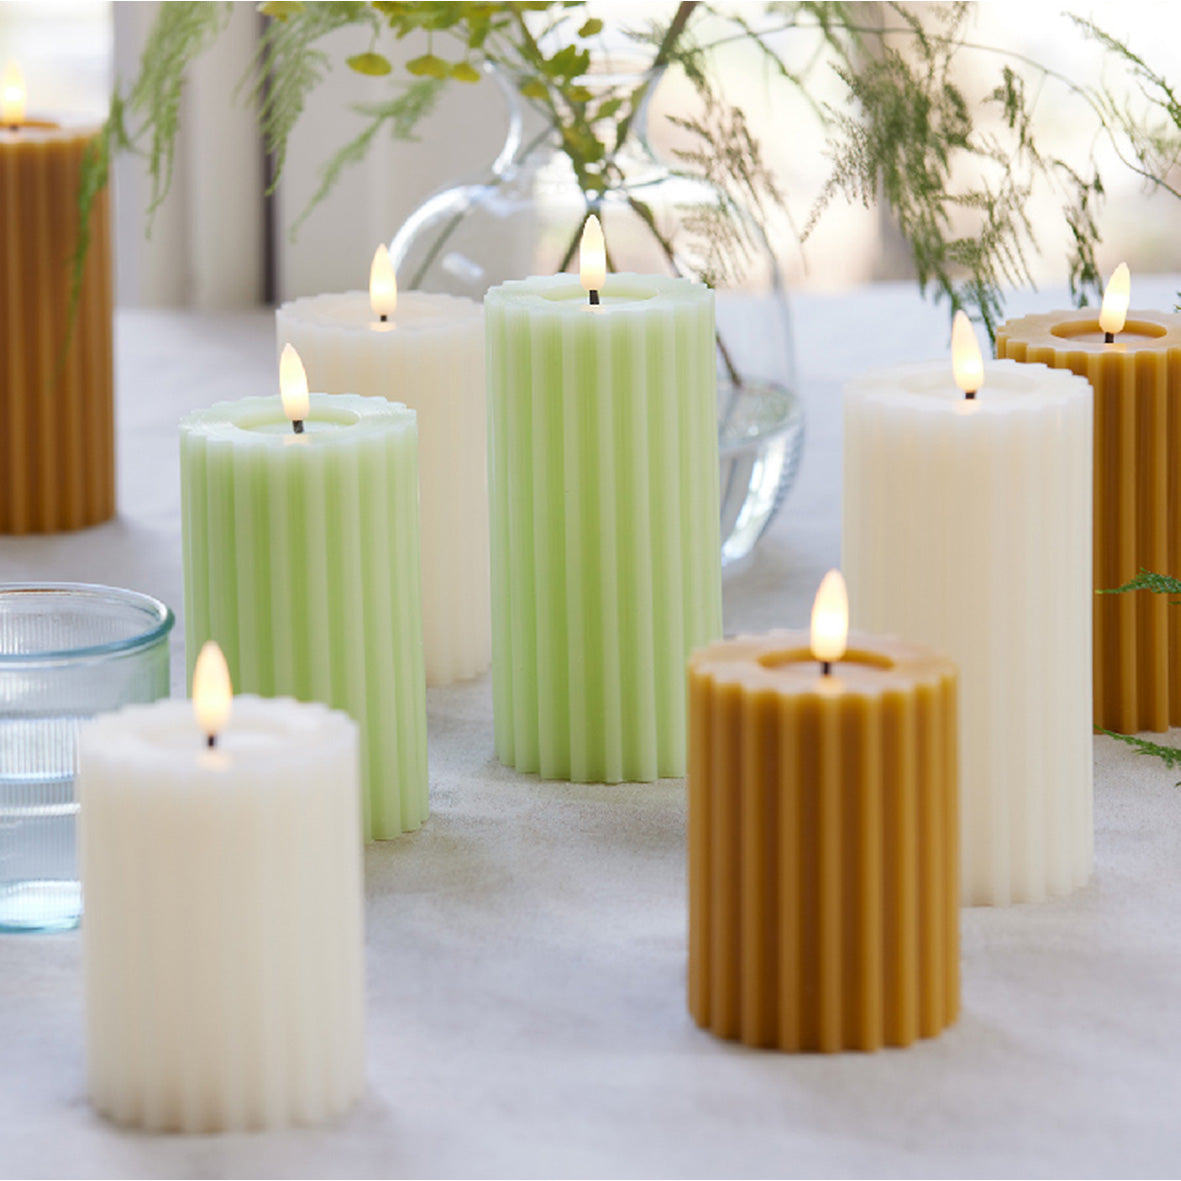 Flame Effect Pillar Candle - Large